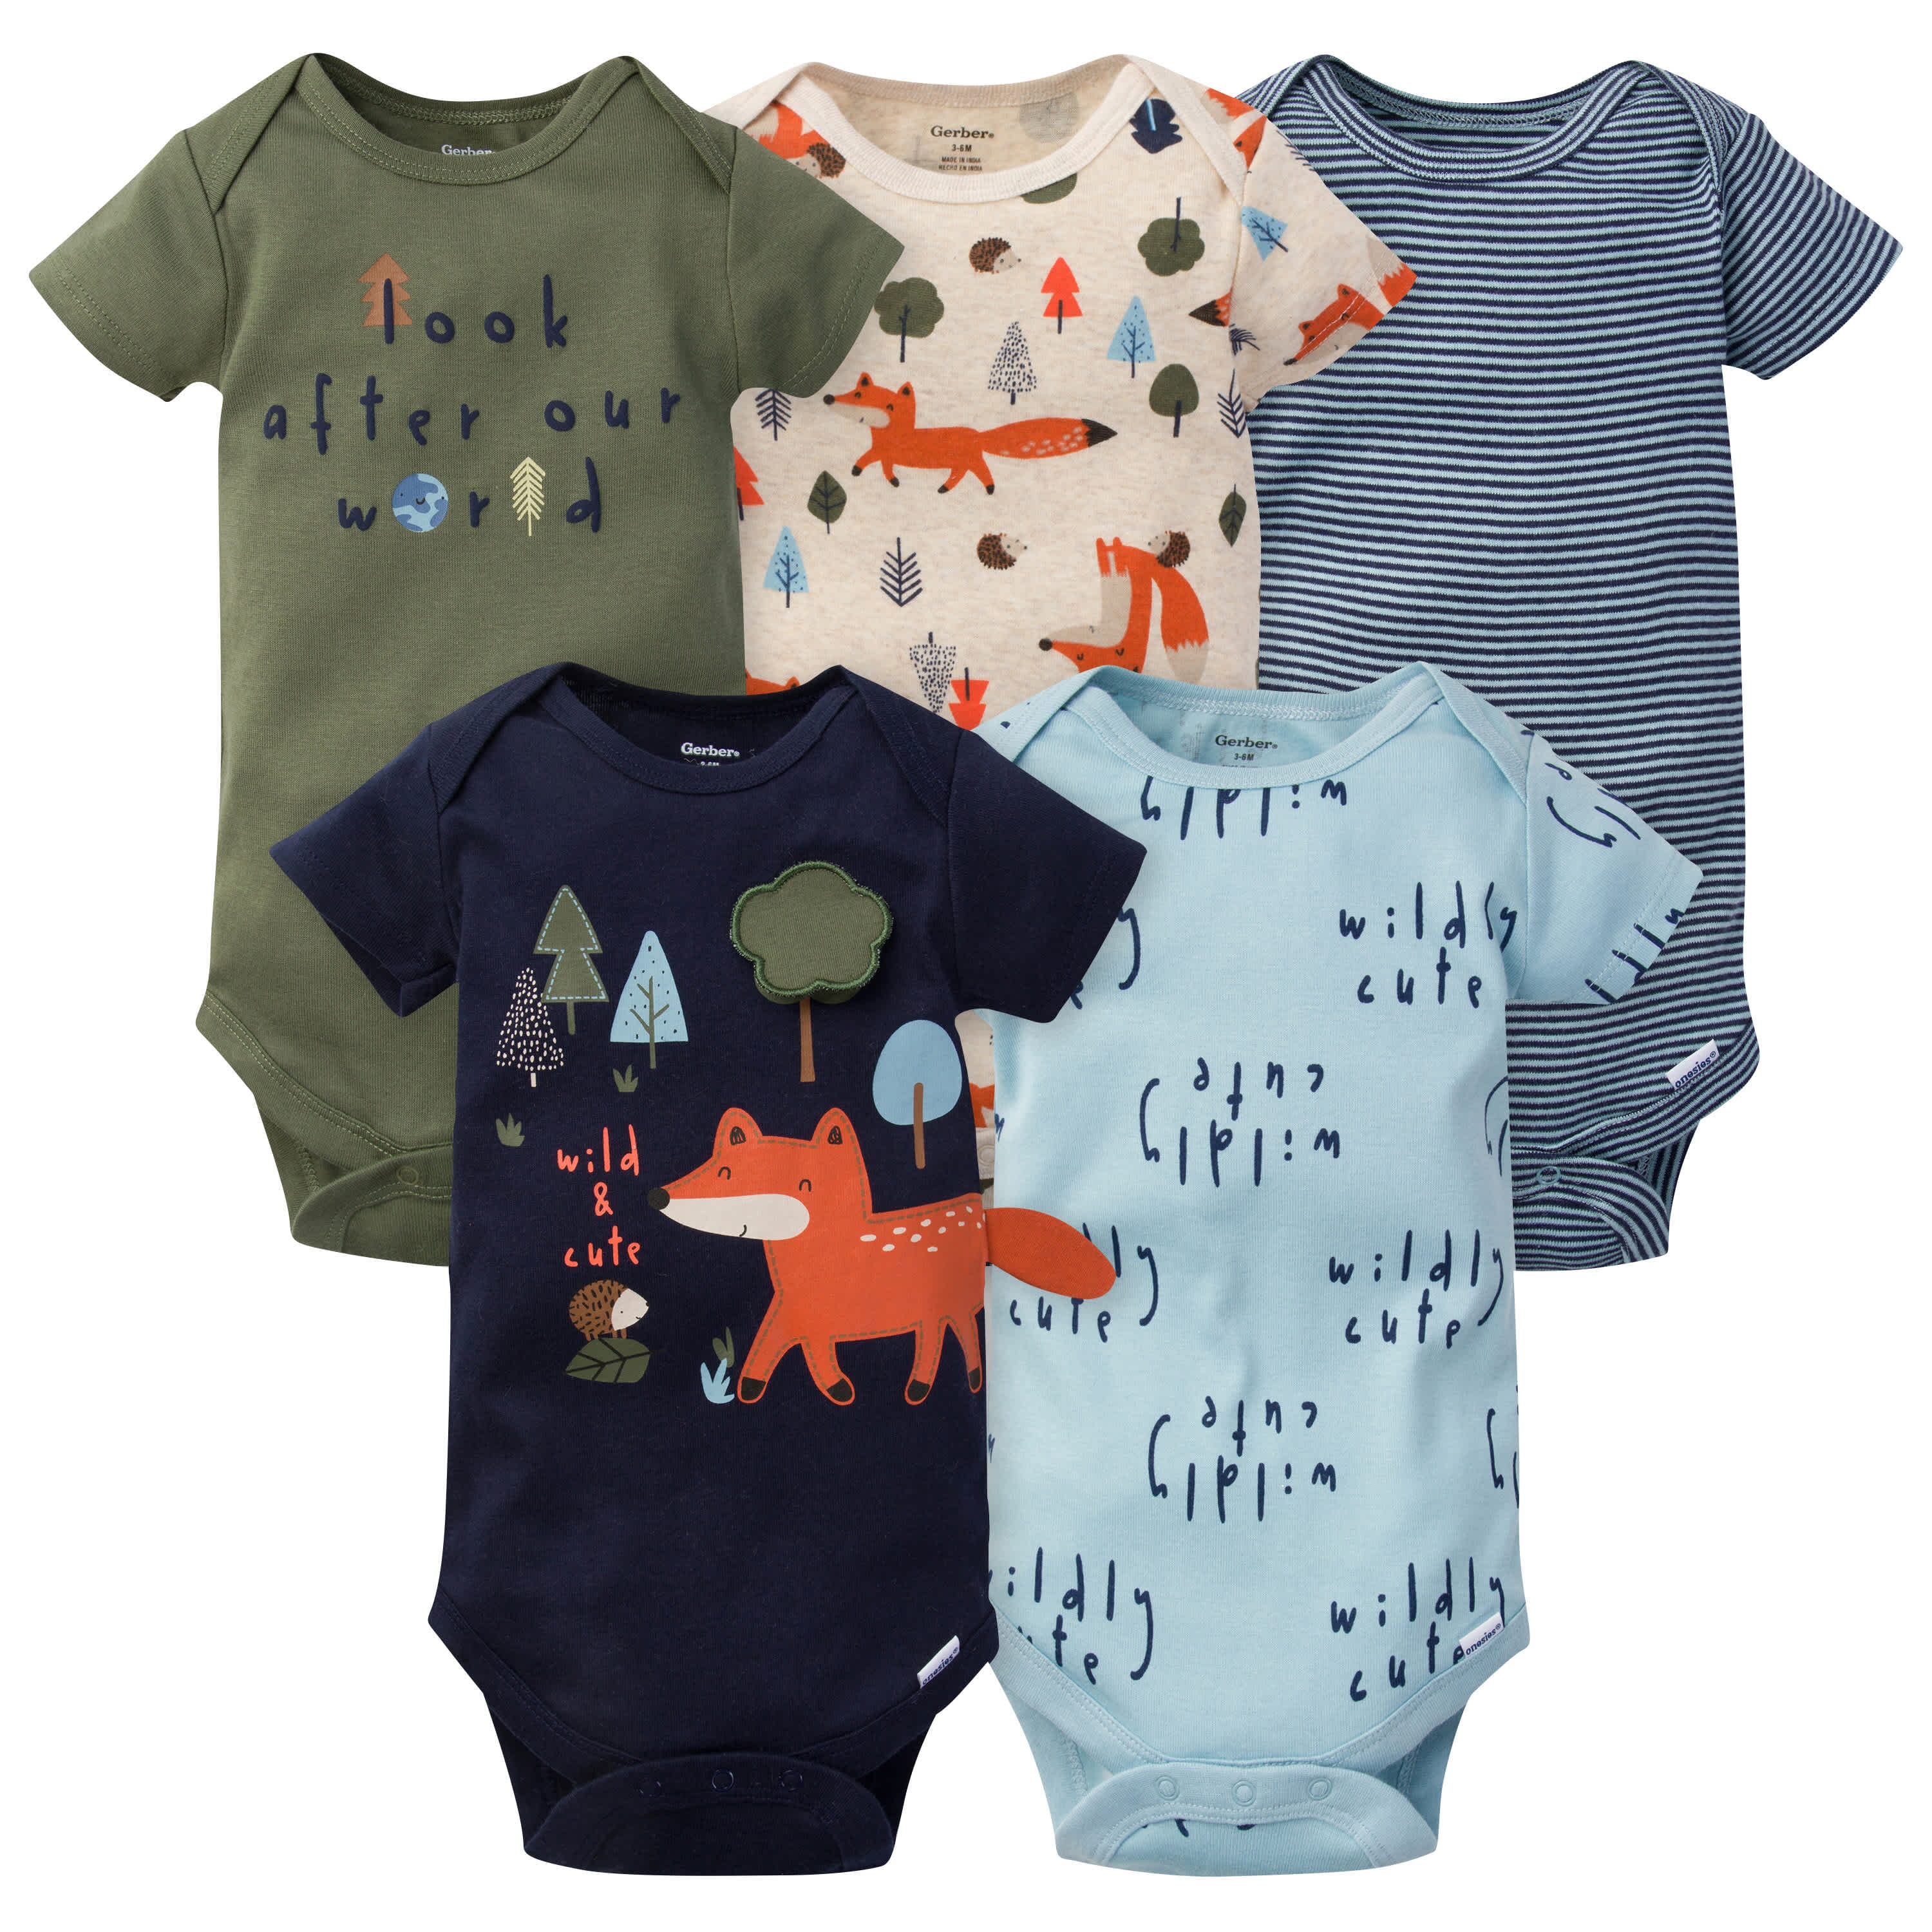 Baby and Toddler Clothes Clearance Doorbuster Deals